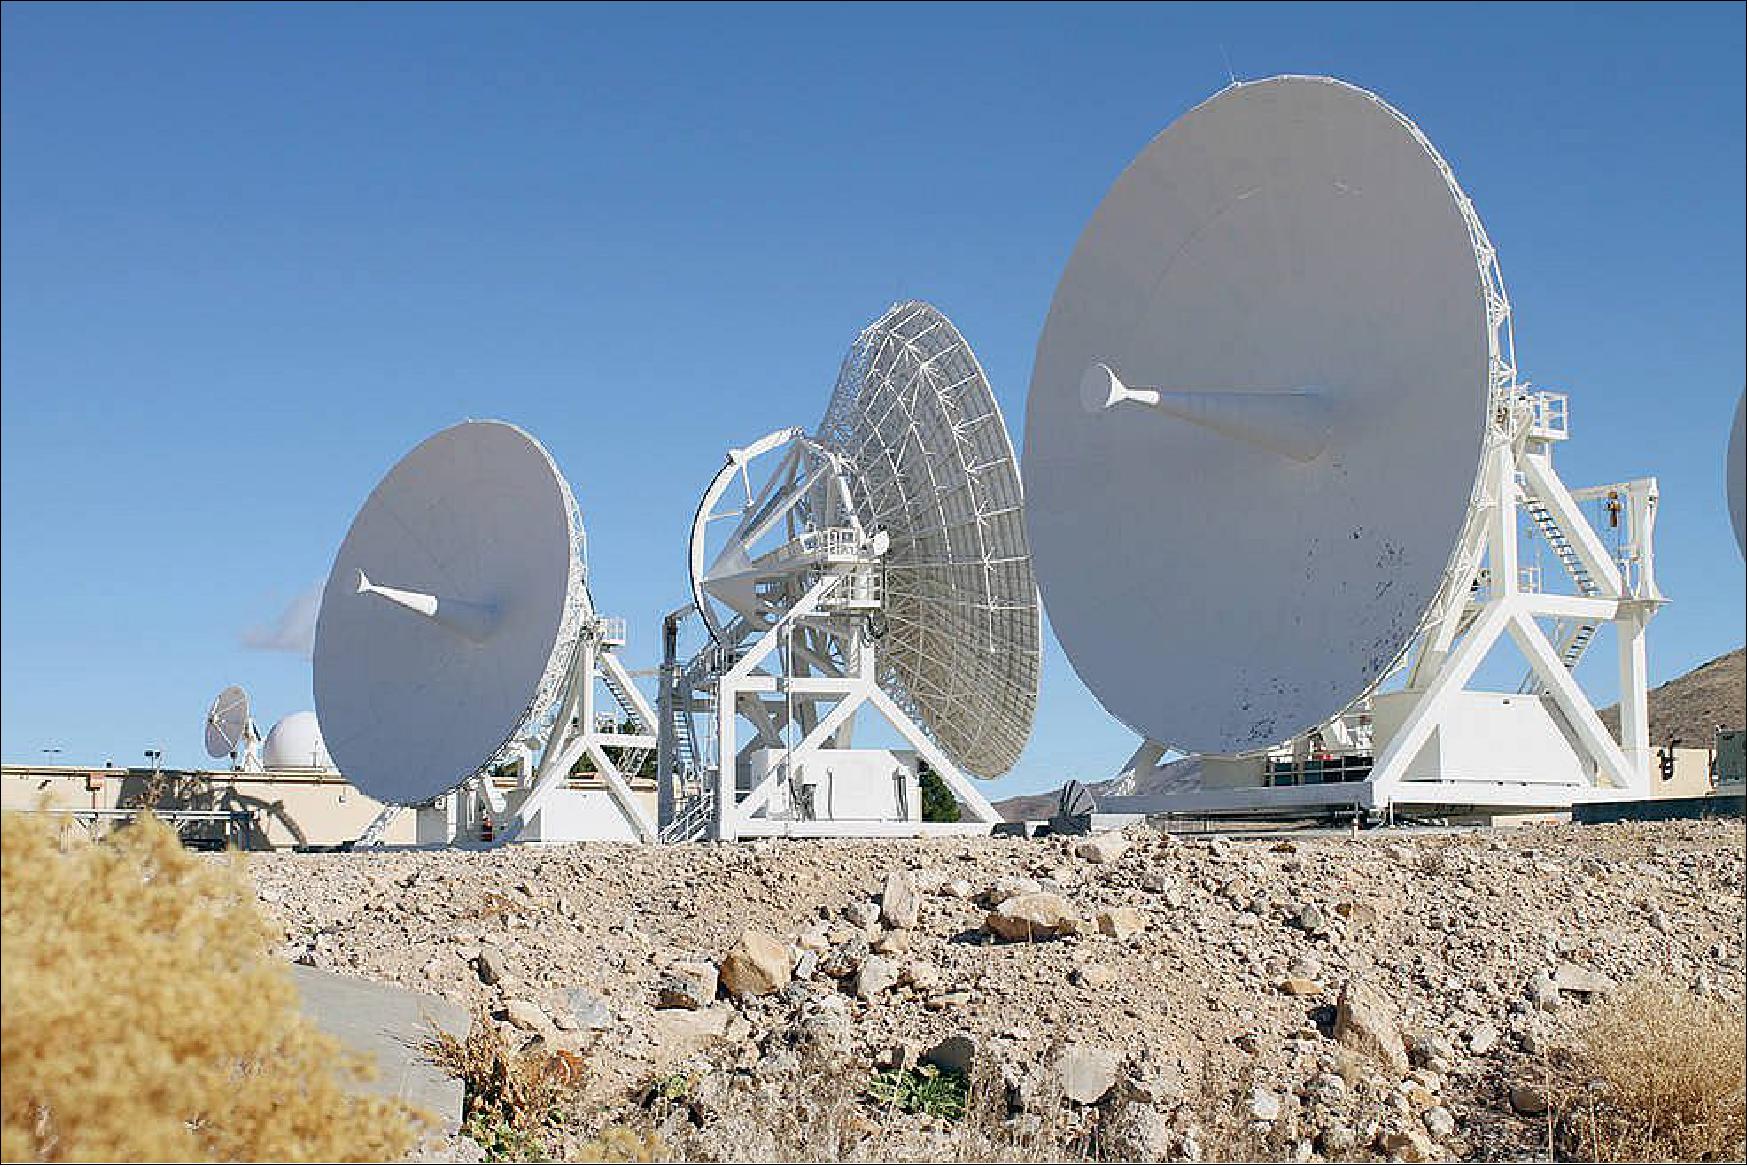 Figure 10: Three Tracking and Data Relay Satellite (TDRS) ground station antennas at NASA's White Sands Complex in Las Cruces, New Mexico (image credit: NASA's Goddard Space Flight Center)